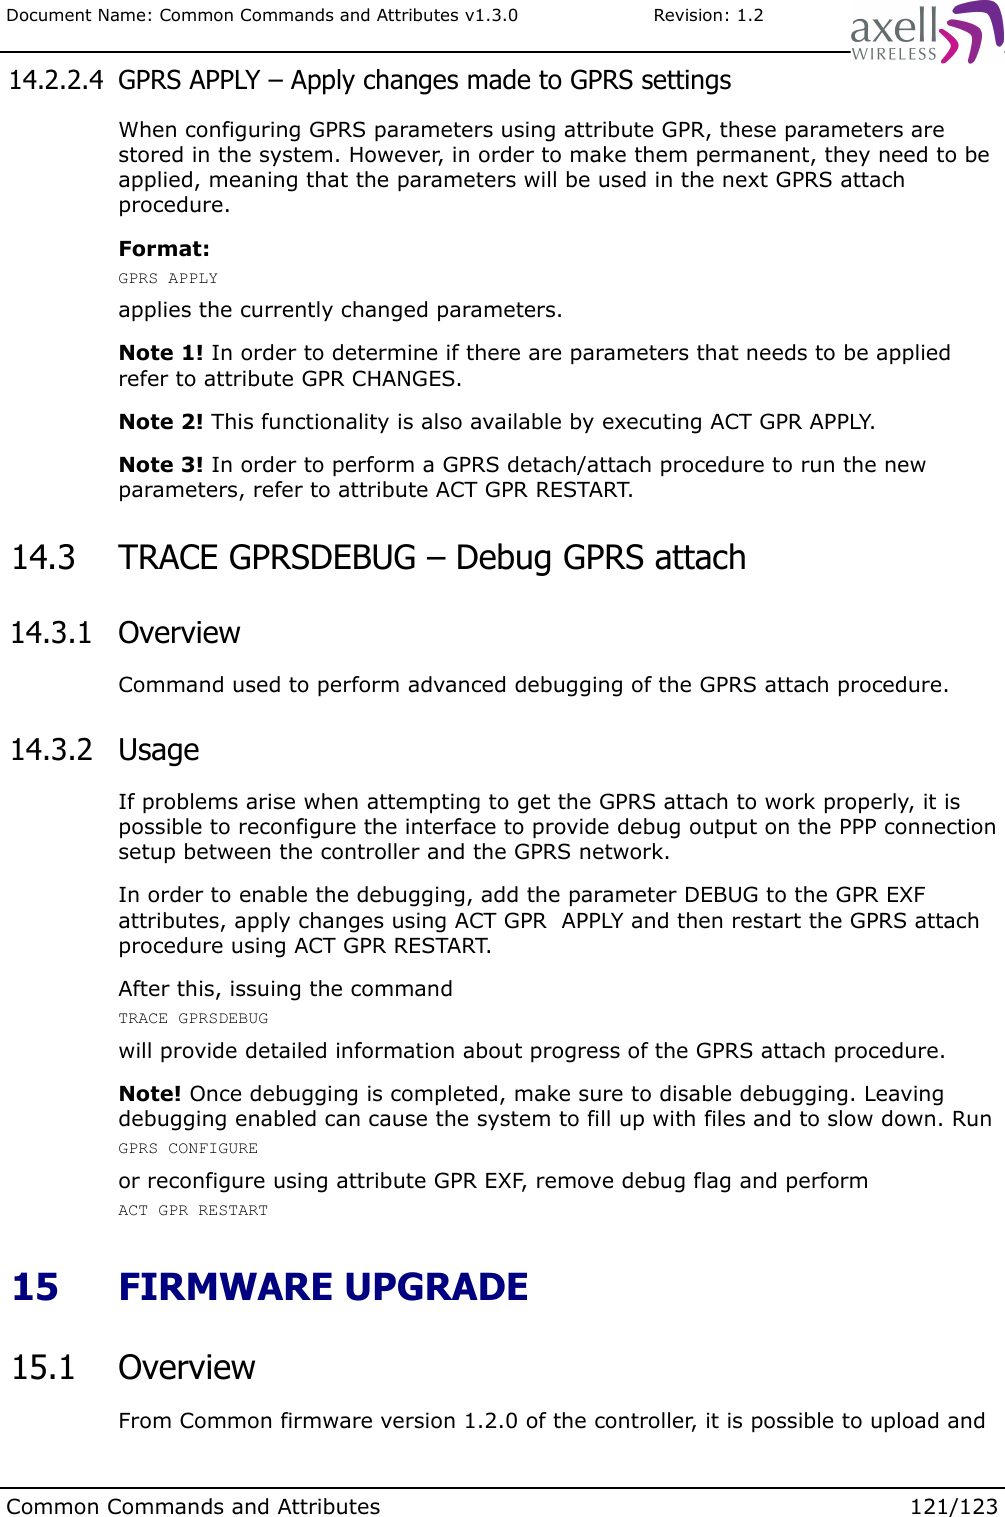 Document Name: Common Commands and Attributes v1.3.0                       Revision: 1.2 14.2.2.4  GPRS APPLY – Apply changes made to GPRS settingsWhen configuring GPRS parameters using attribute GPR, these parameters are stored in the system. However, in order to make them permanent, they need to be applied, meaning that the parameters will be used in the next GPRS attach procedure.Format:GPRS APPLYapplies the currently changed parameters.Note 1! In order to determine if there are parameters that needs to be applied refer to attribute GPR CHANGES.Note 2! This functionality is also available by executing ACT GPR APPLY.Note 3! In order to perform a GPRS detach/attach procedure to run the new parameters, refer to attribute ACT GPR RESTART. 14.3  TRACE GPRSDEBUG – Debug GPRS attach  14.3.1  OverviewCommand used to perform advanced debugging of the GPRS attach procedure. 14.3.2  UsageIf problems arise when attempting to get the GPRS attach to work properly, it is possible to reconfigure the interface to provide debug output on the PPP connection setup between the controller and the GPRS network.In order to enable the debugging, add the parameter DEBUG to the GPR EXF attributes, apply changes using ACT GPR  APPLY and then restart the GPRS attach procedure using ACT GPR RESTART.After this, issuing the commandTRACE GPRSDEBUG will provide detailed information about progress of the GPRS attach procedure. Note! Once debugging is completed, make sure to disable debugging. Leaving debugging enabled can cause the system to fill up with files and to slow down. RunGPRS CONFIGUREor reconfigure using attribute GPR EXF, remove debug flag and performACT GPR RESTART  15  FIRMWARE UPGRADE 15.1  OverviewFrom Common firmware version 1.2.0 of the controller, it is possible to upload and Common Commands and Attributes 121/123